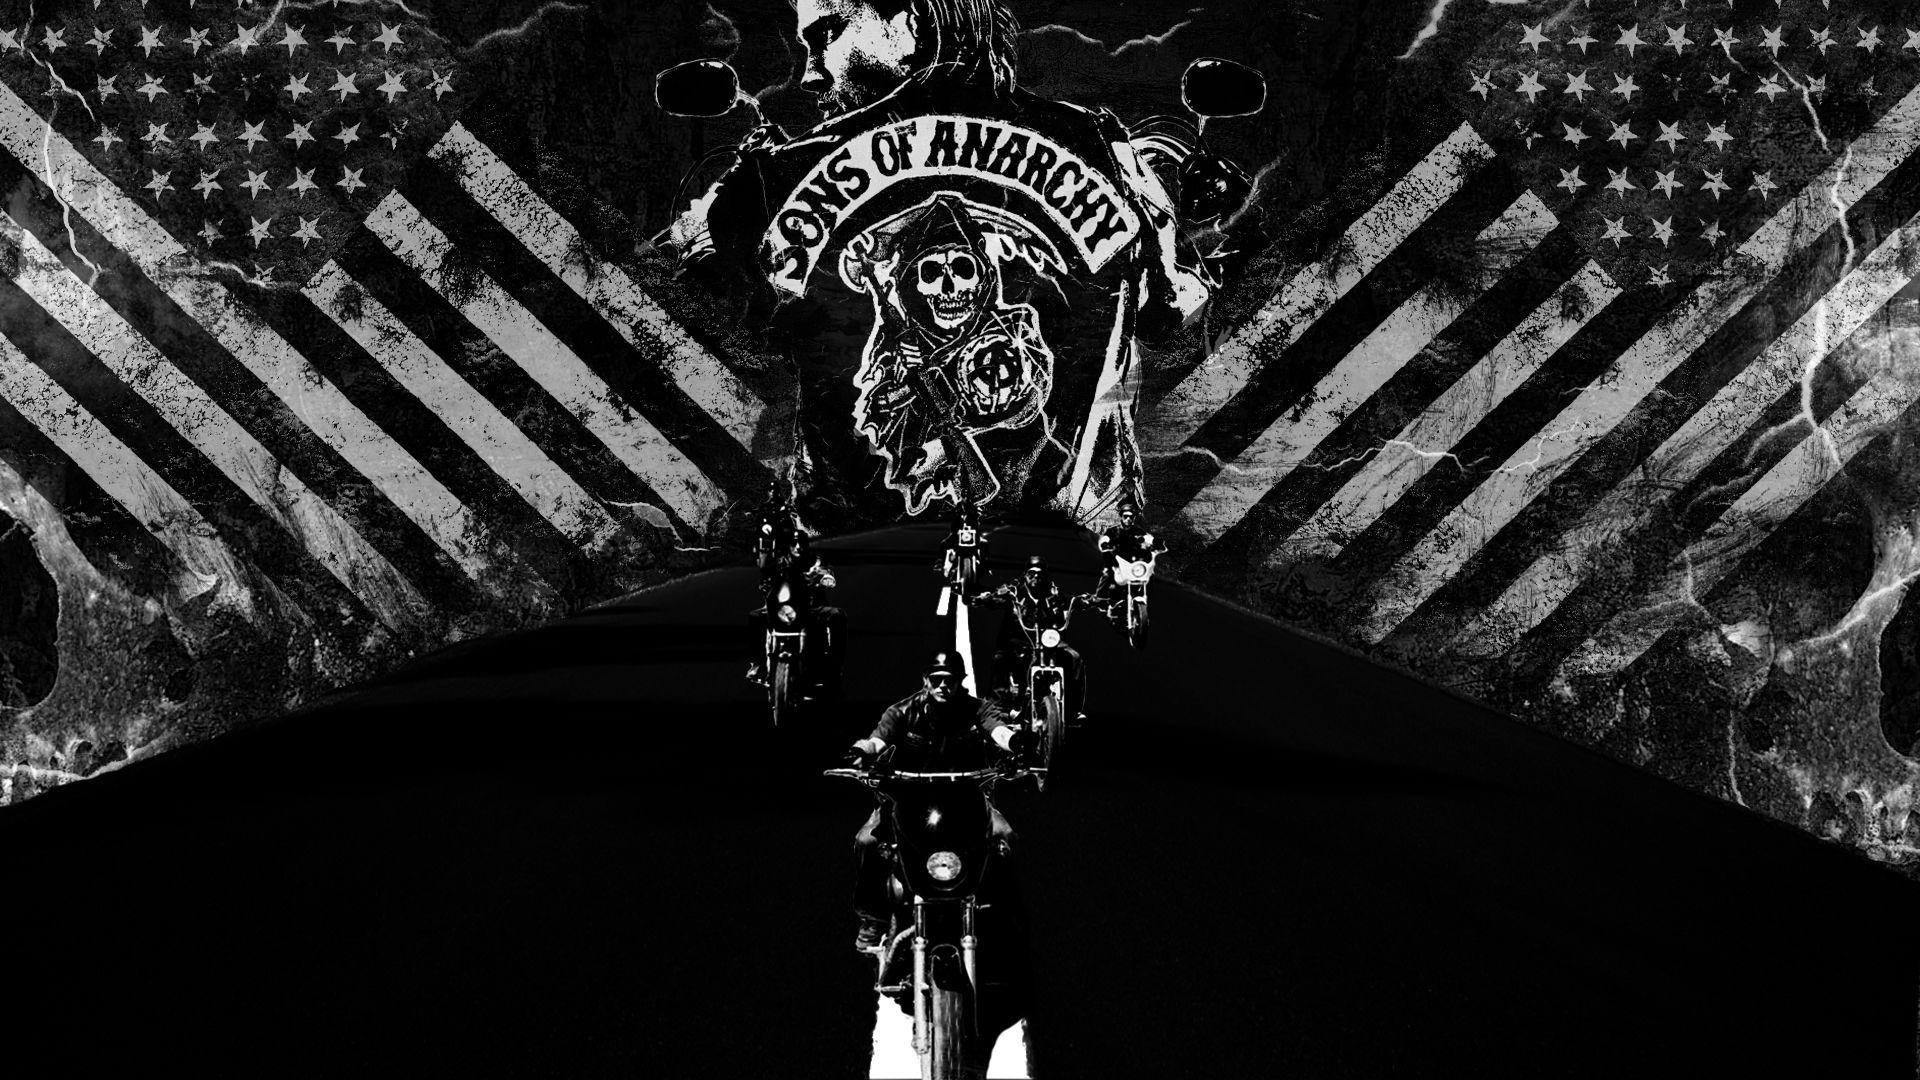 Sons of Anarchy Wallpapers - Top Free Sons of Anarchy Backgrounds